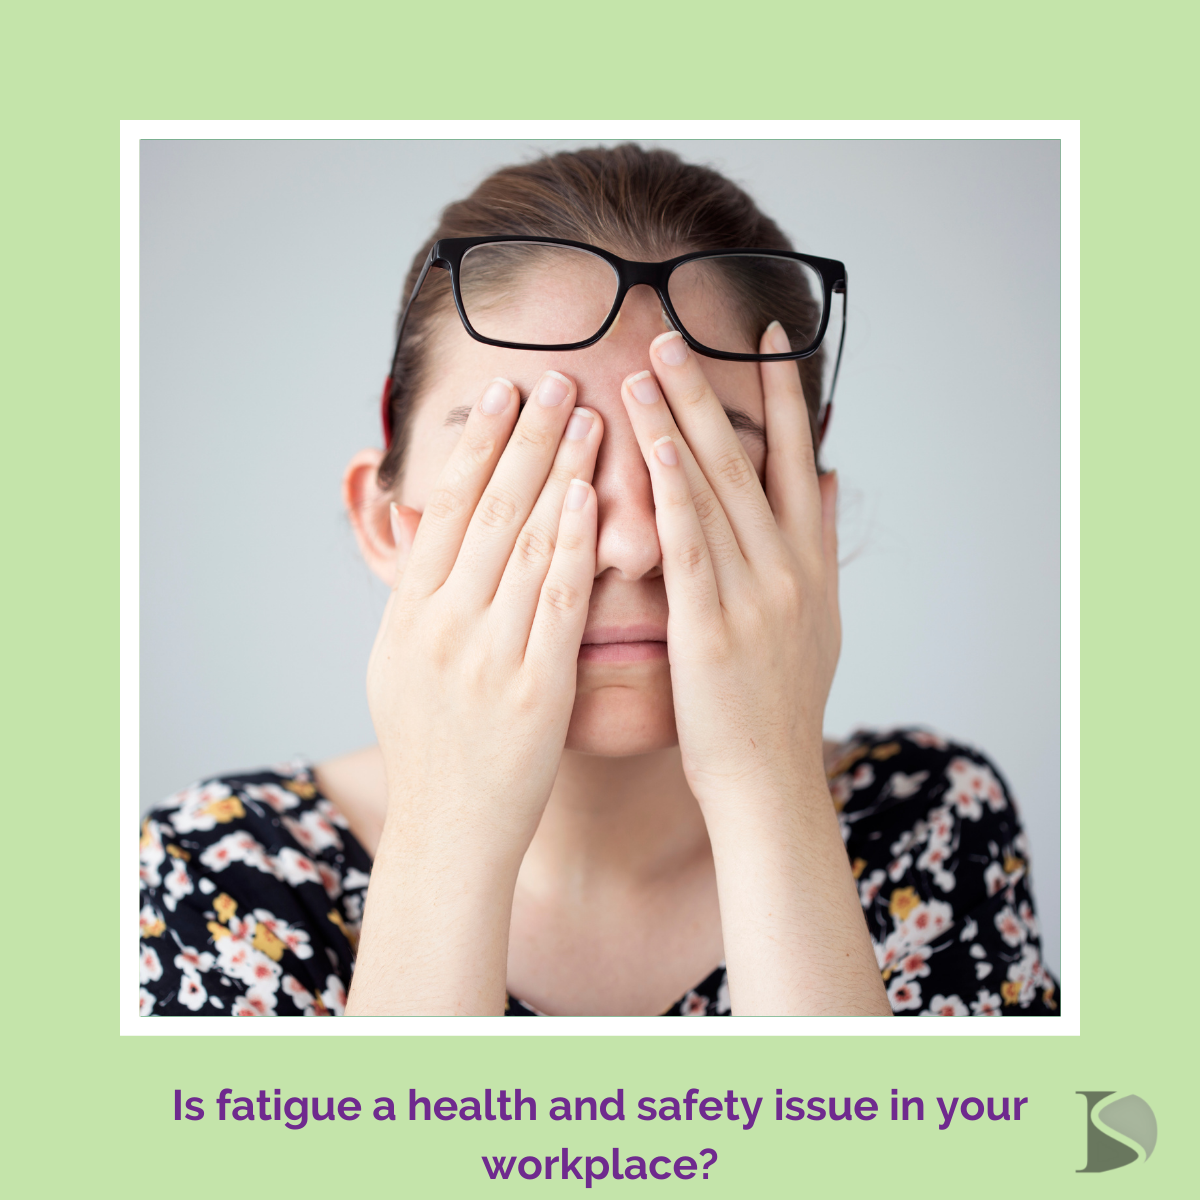 Is fatigue a health and safety issue in your workplace